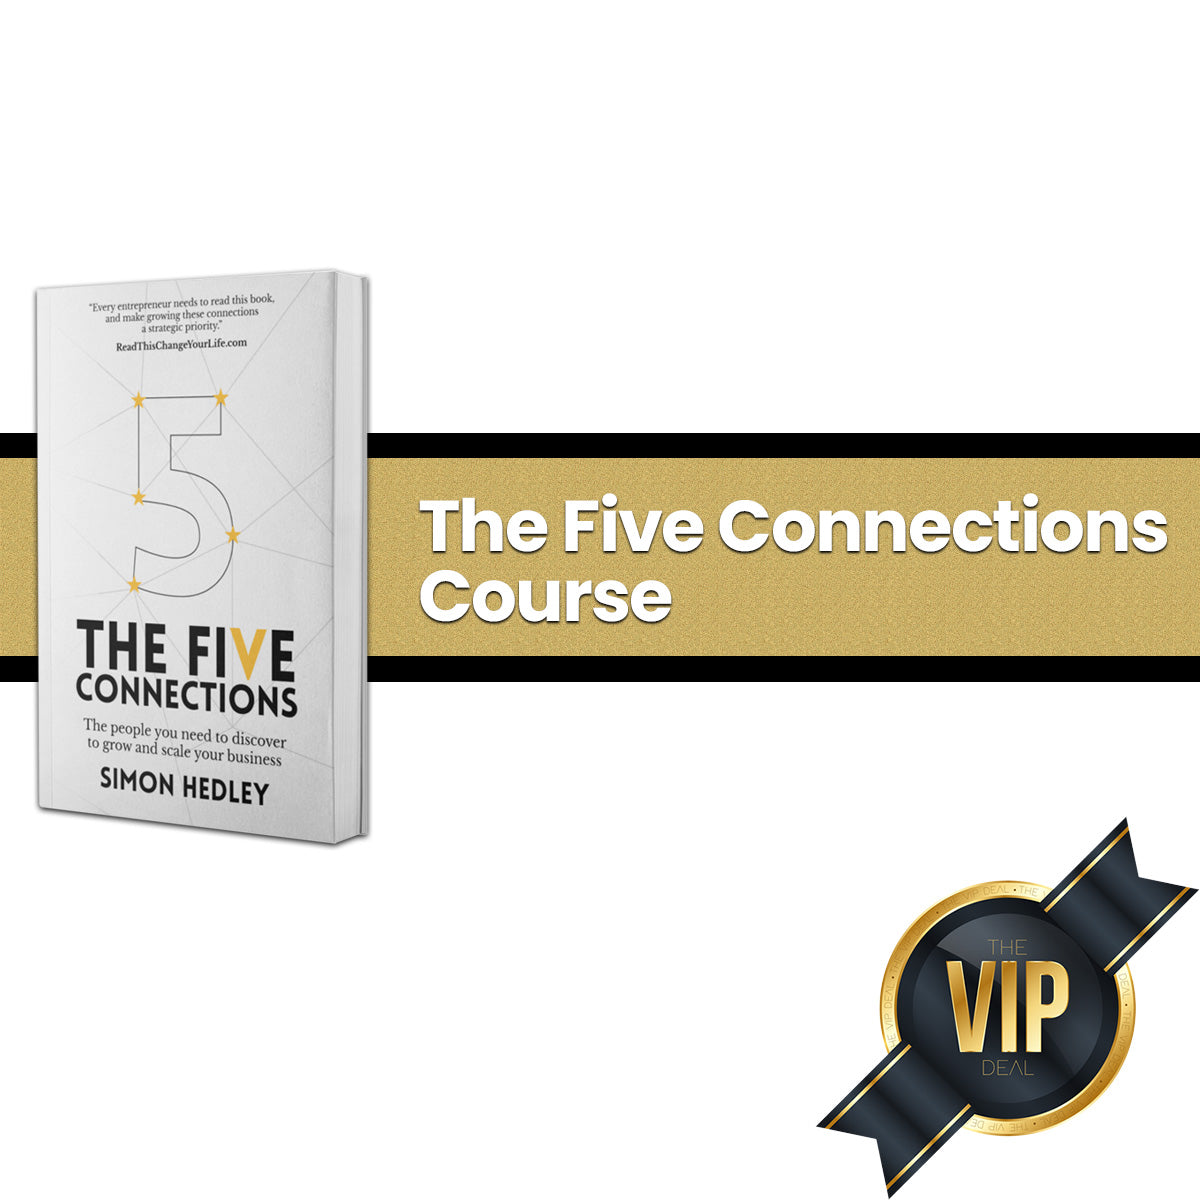 The Five Connections Course